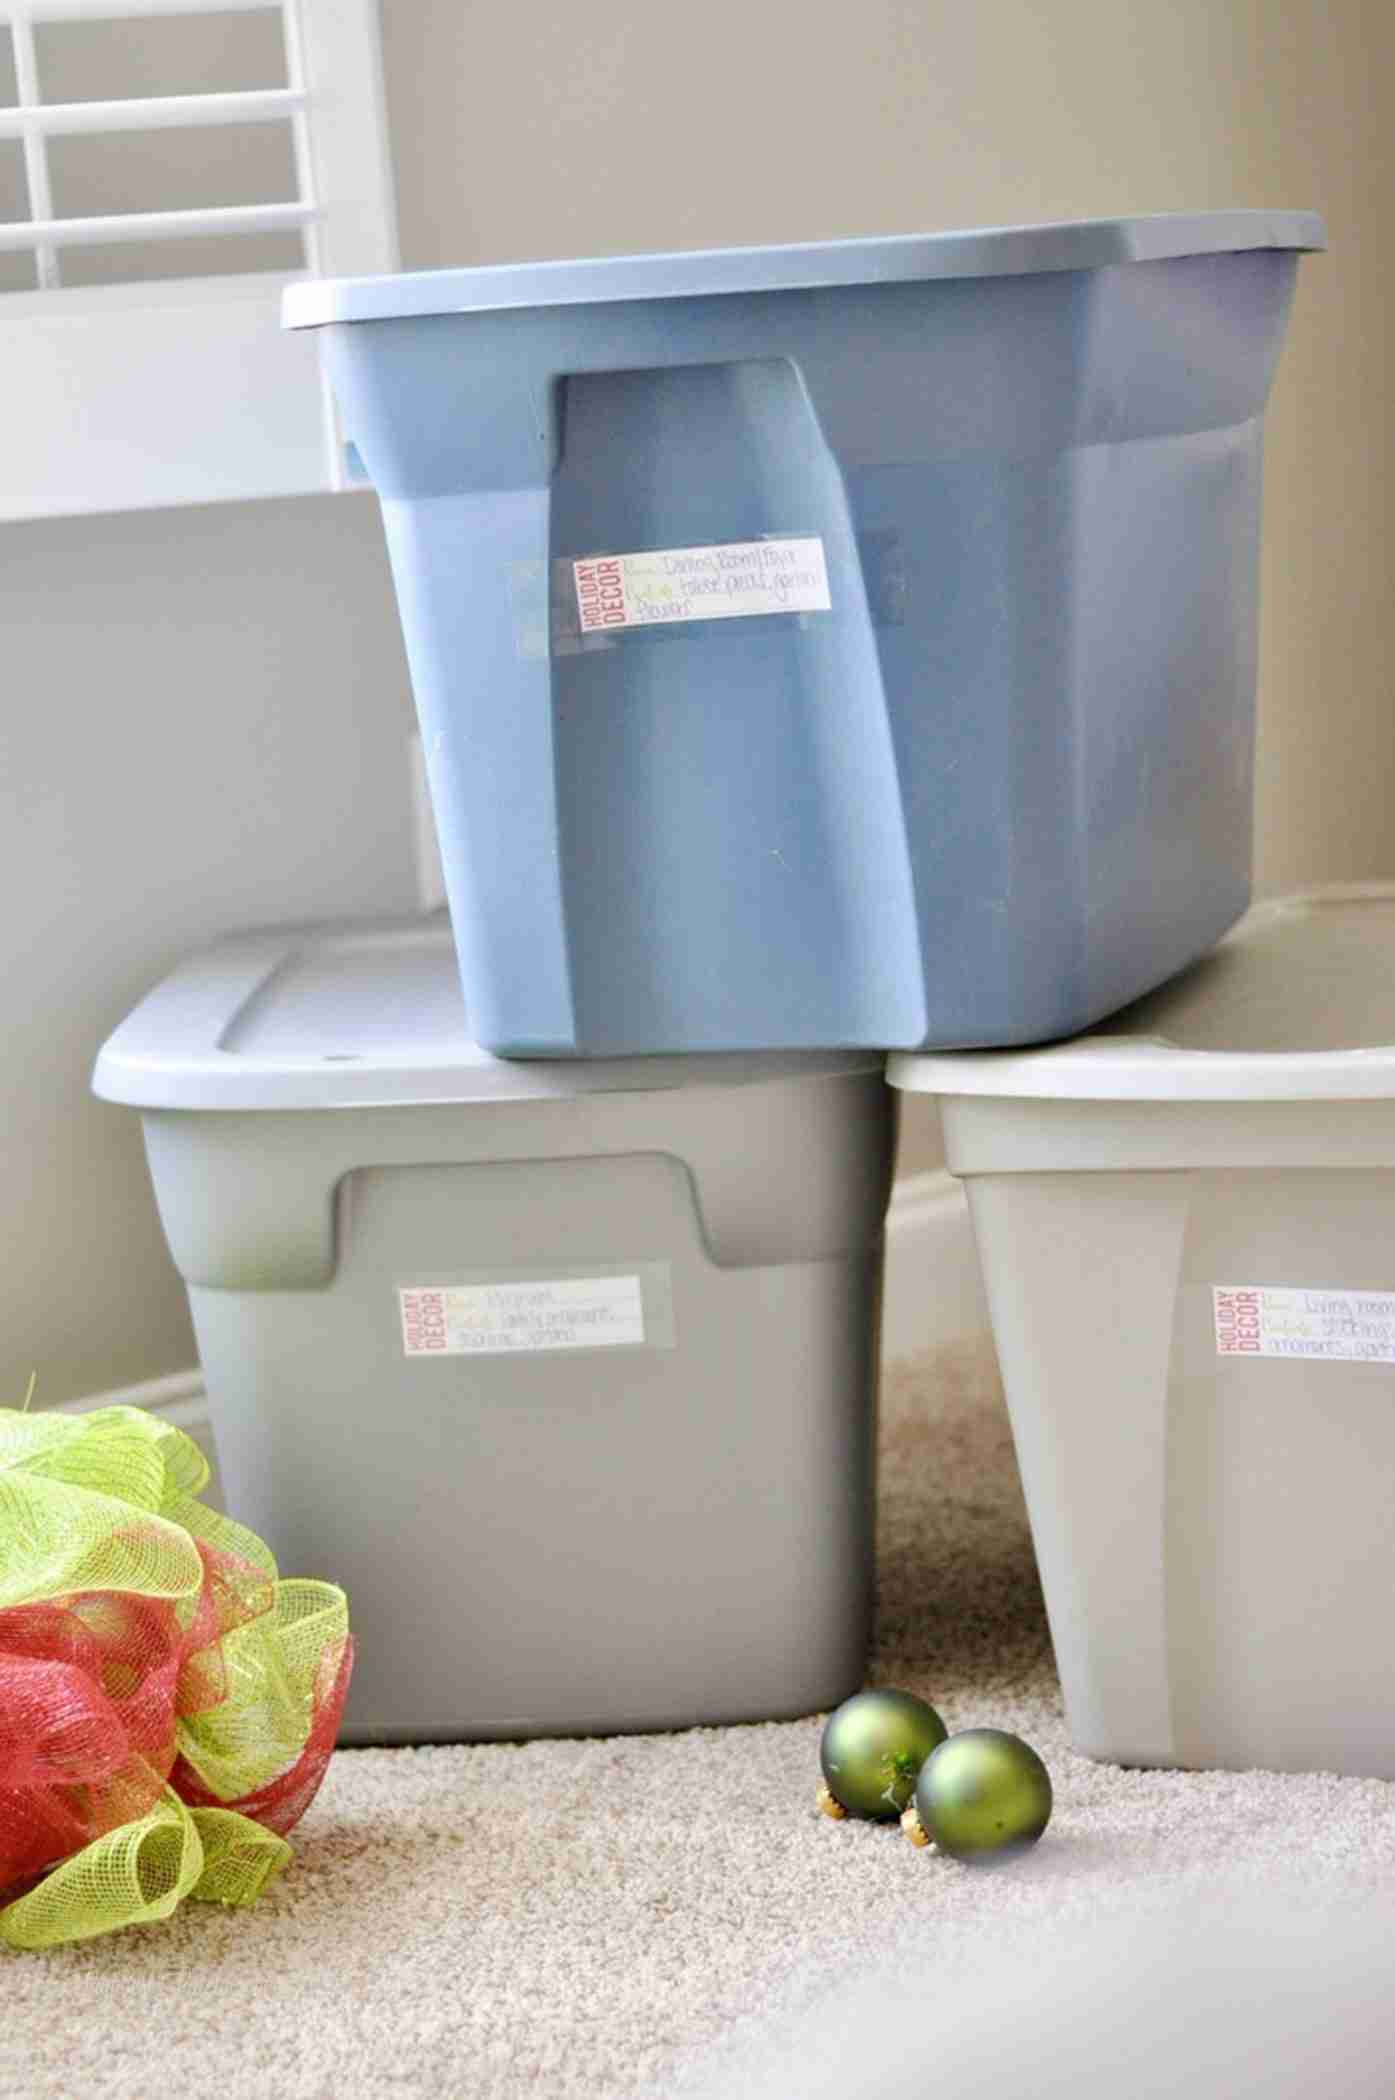 Check out how to organize Christmas storage bins and grab a free printable for your holiday storage boxes! Lots of organization tips and tricks on ways to store Christmas decorations.